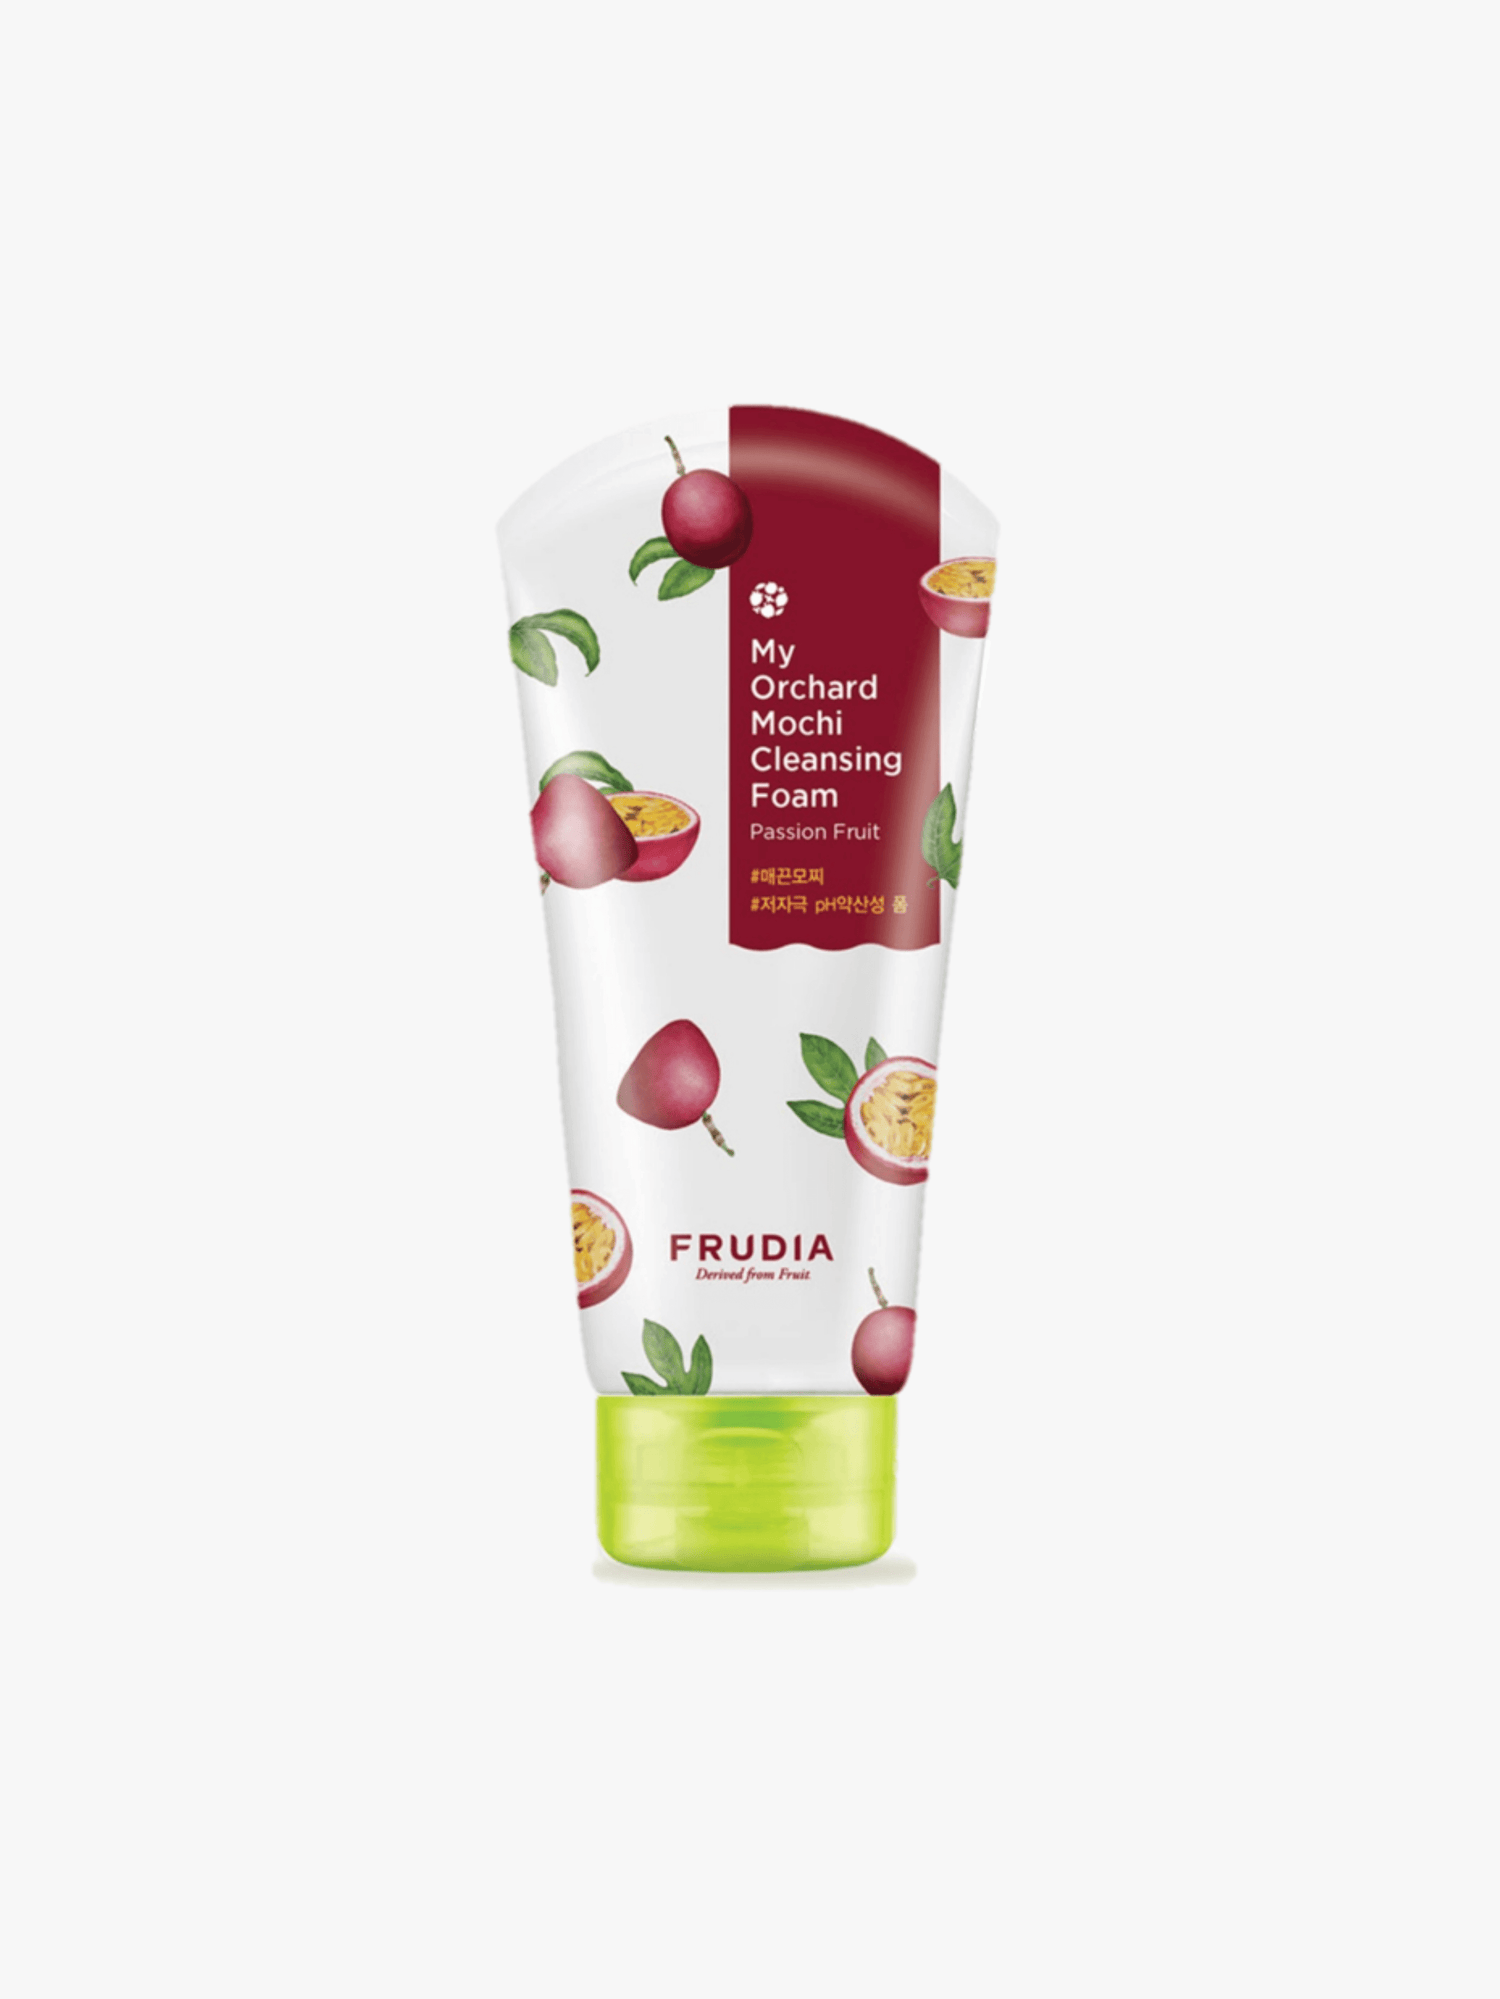 Frudia - Cleanser - My Orchard Mochi Cleansing Foam Passion Fruit